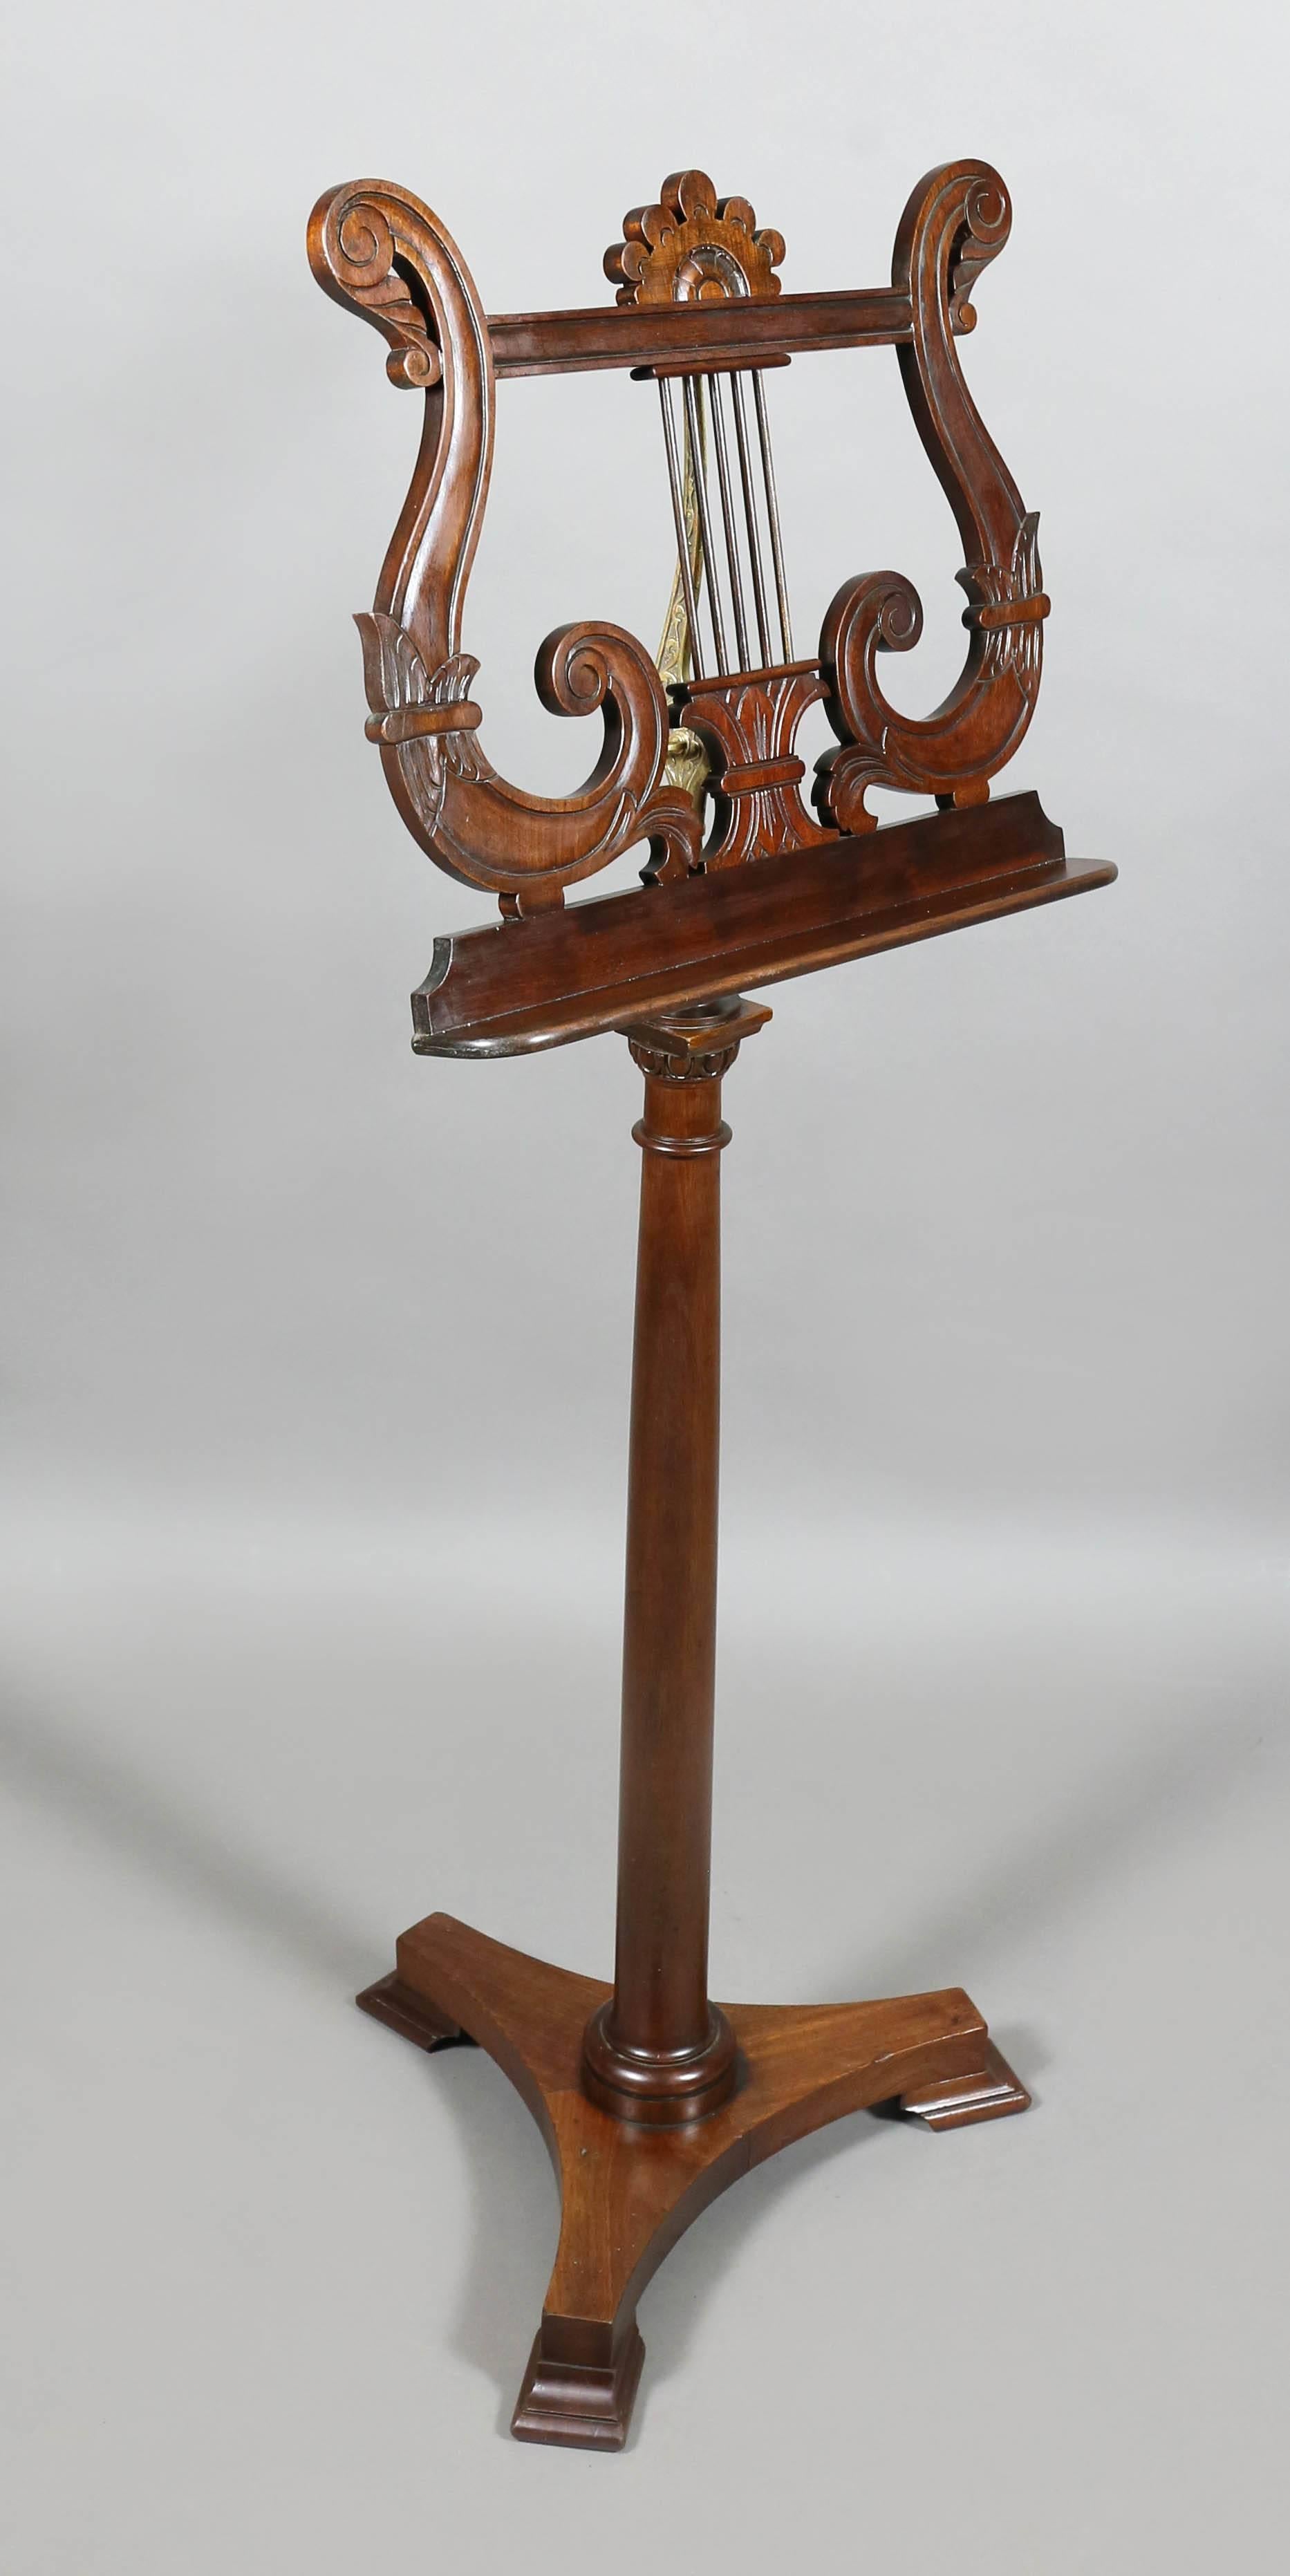 With lyre shaped carved stand on a turned support and tripartite base.